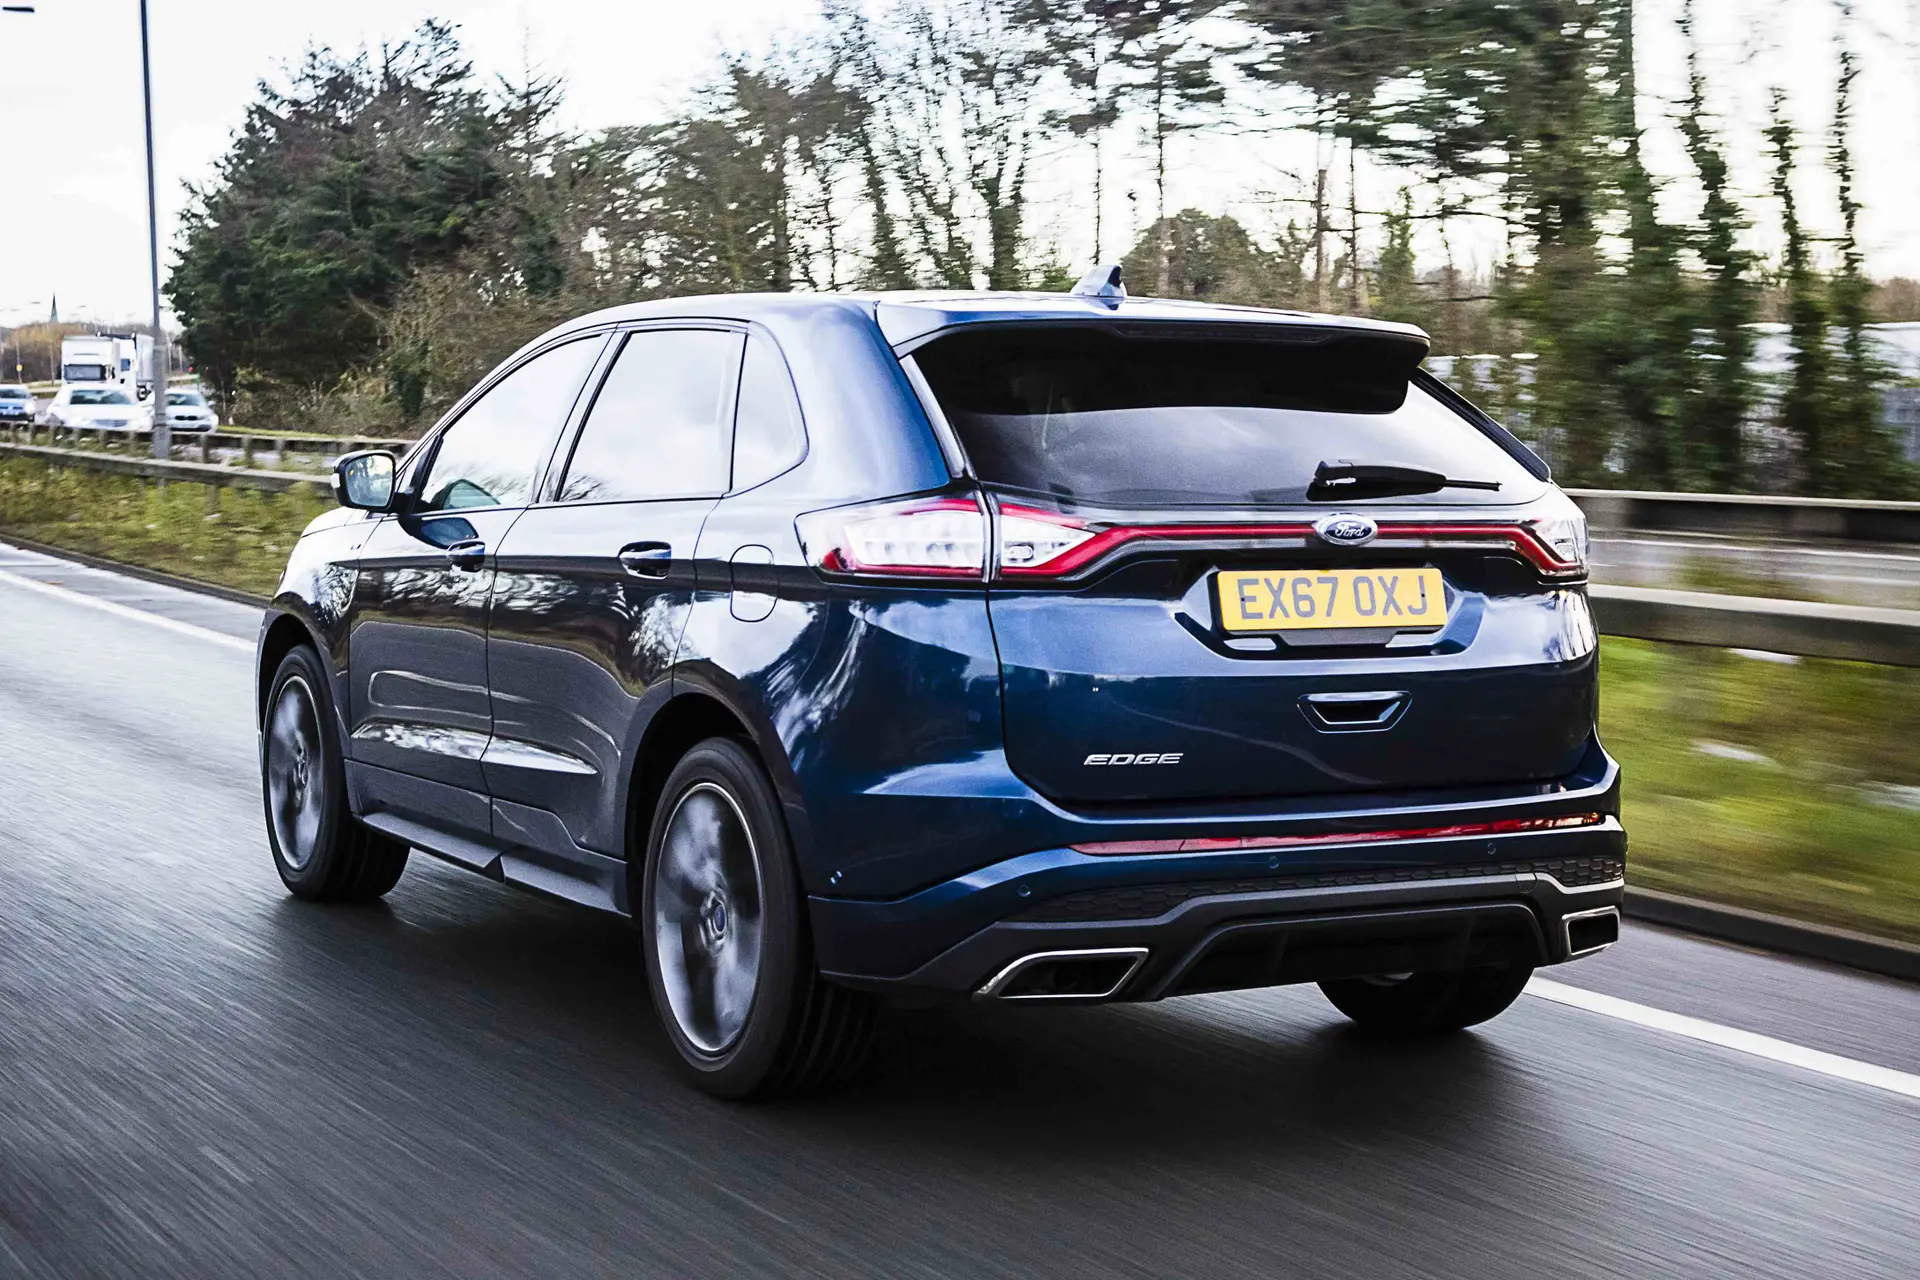 Ford Edge (2016-2019) Review: exterior rear three quarter photo of the Ford Edge on the road